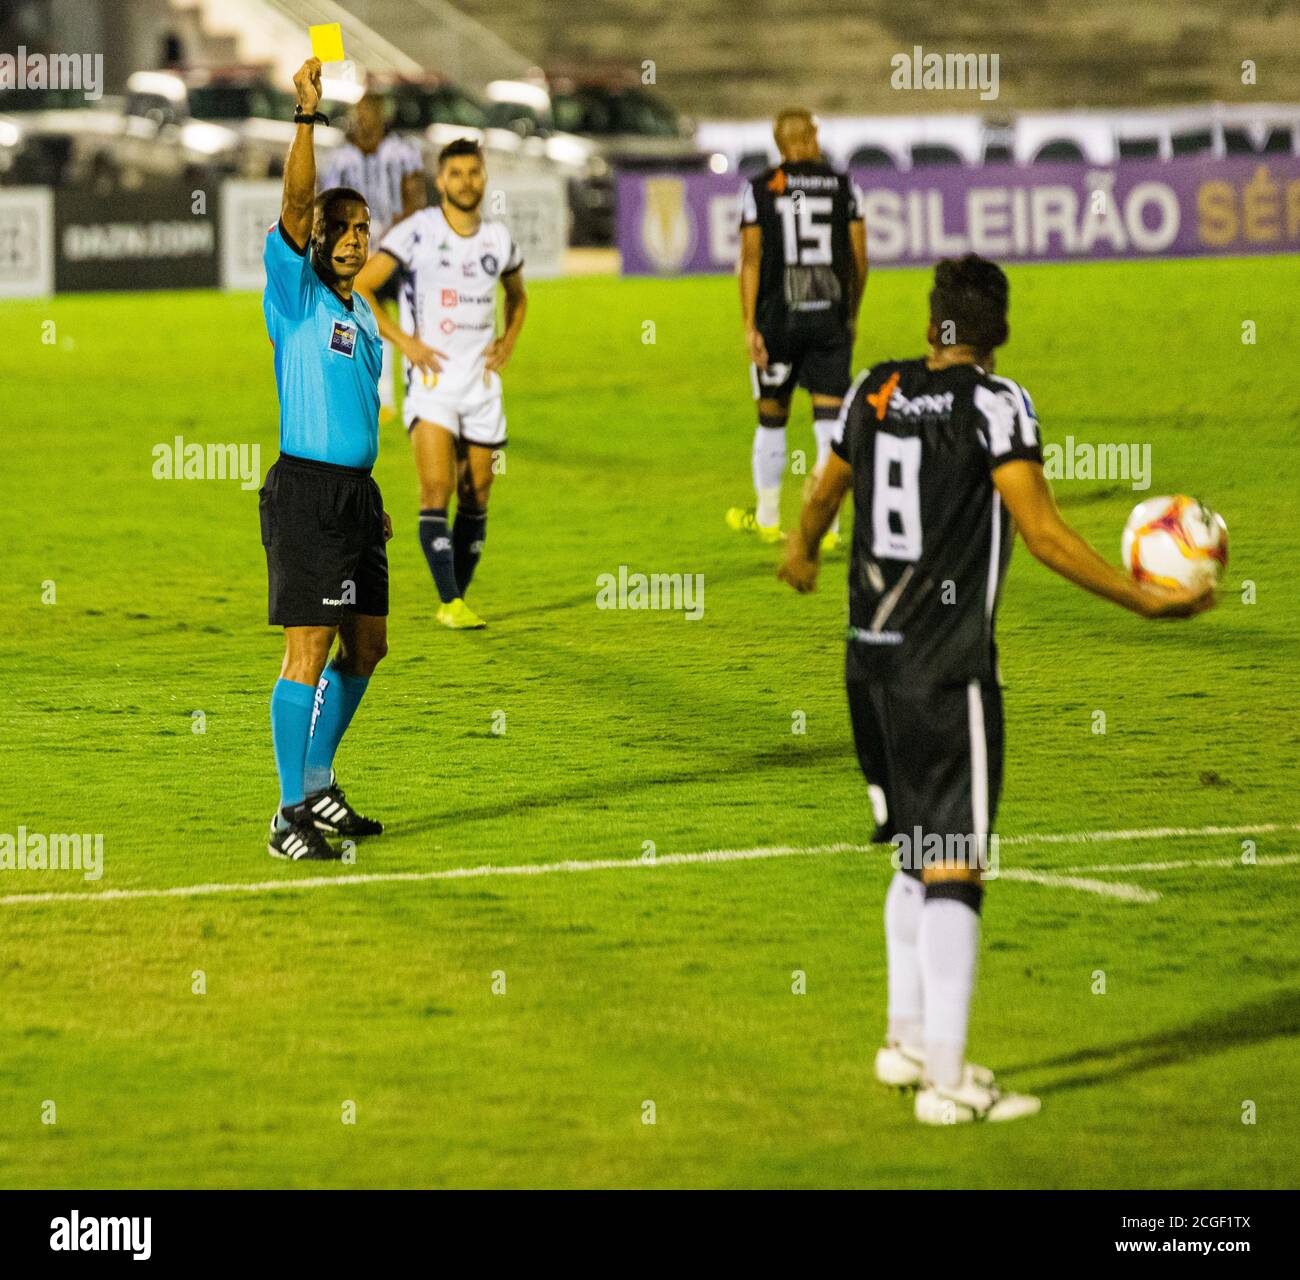 Campina Grande, Brazil. 10th Sep, 2020. Referee Luiz Sobral presents a yellow card to Vinícius Barba do Treze during a match between Treze and Remo, valid for the 5th round of the Brazilian Championship C series, held this Thursday (10th) night at the Governador Ernani Sátyro Stadium in Campina Grande, Paraíba. Credit: Daniel Lins/FotoArena/Alamy Live News Stock Photo